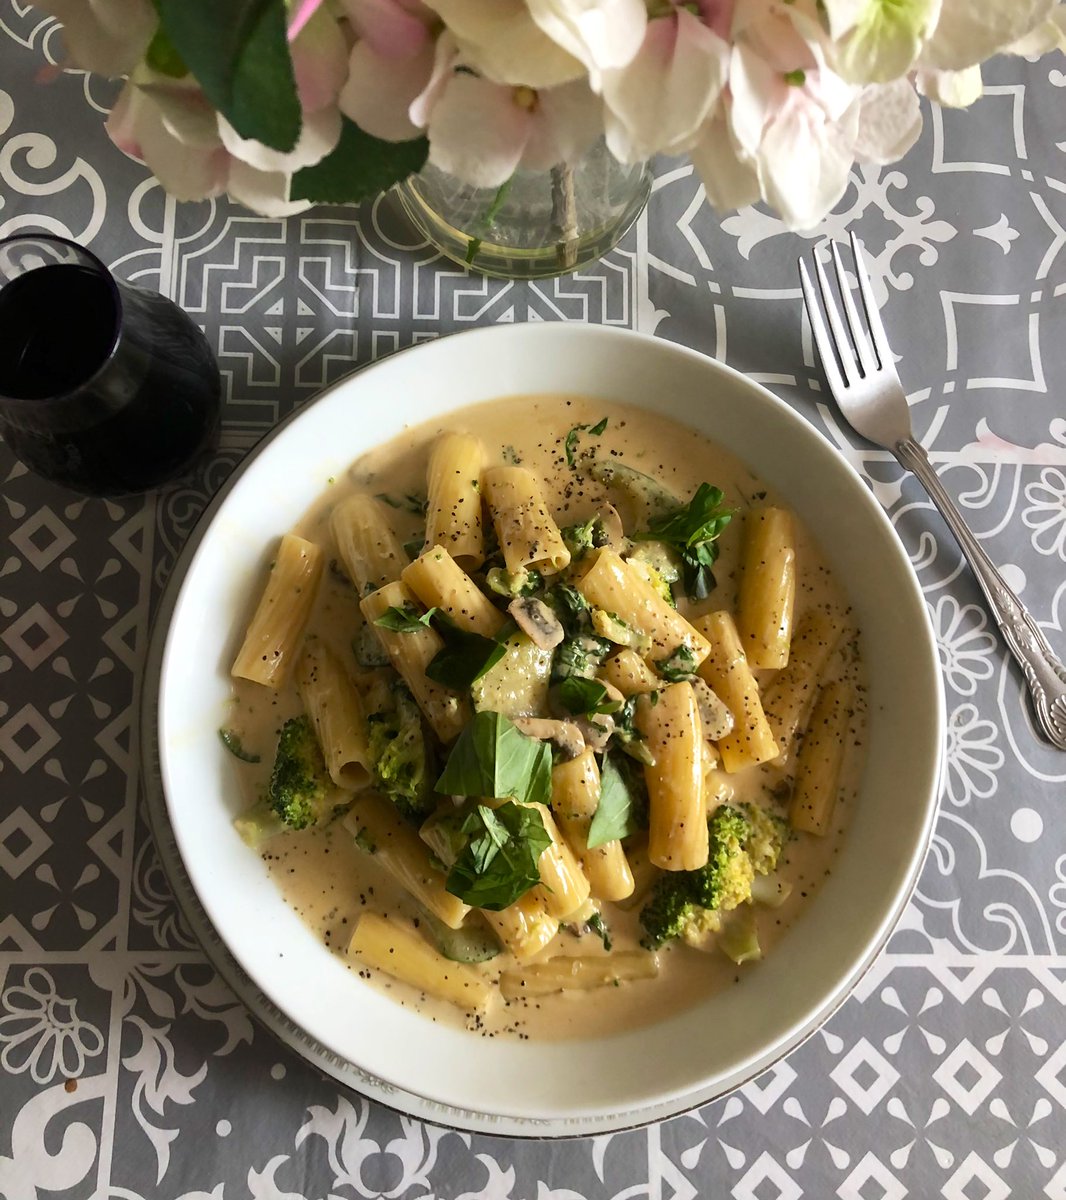 My supper this evening:
Rigatoni pasta served with 
mushrooms, broccoli & courgette 
in a homemade Stilton & 
basil sauce… Yum! 😋🥦🌿